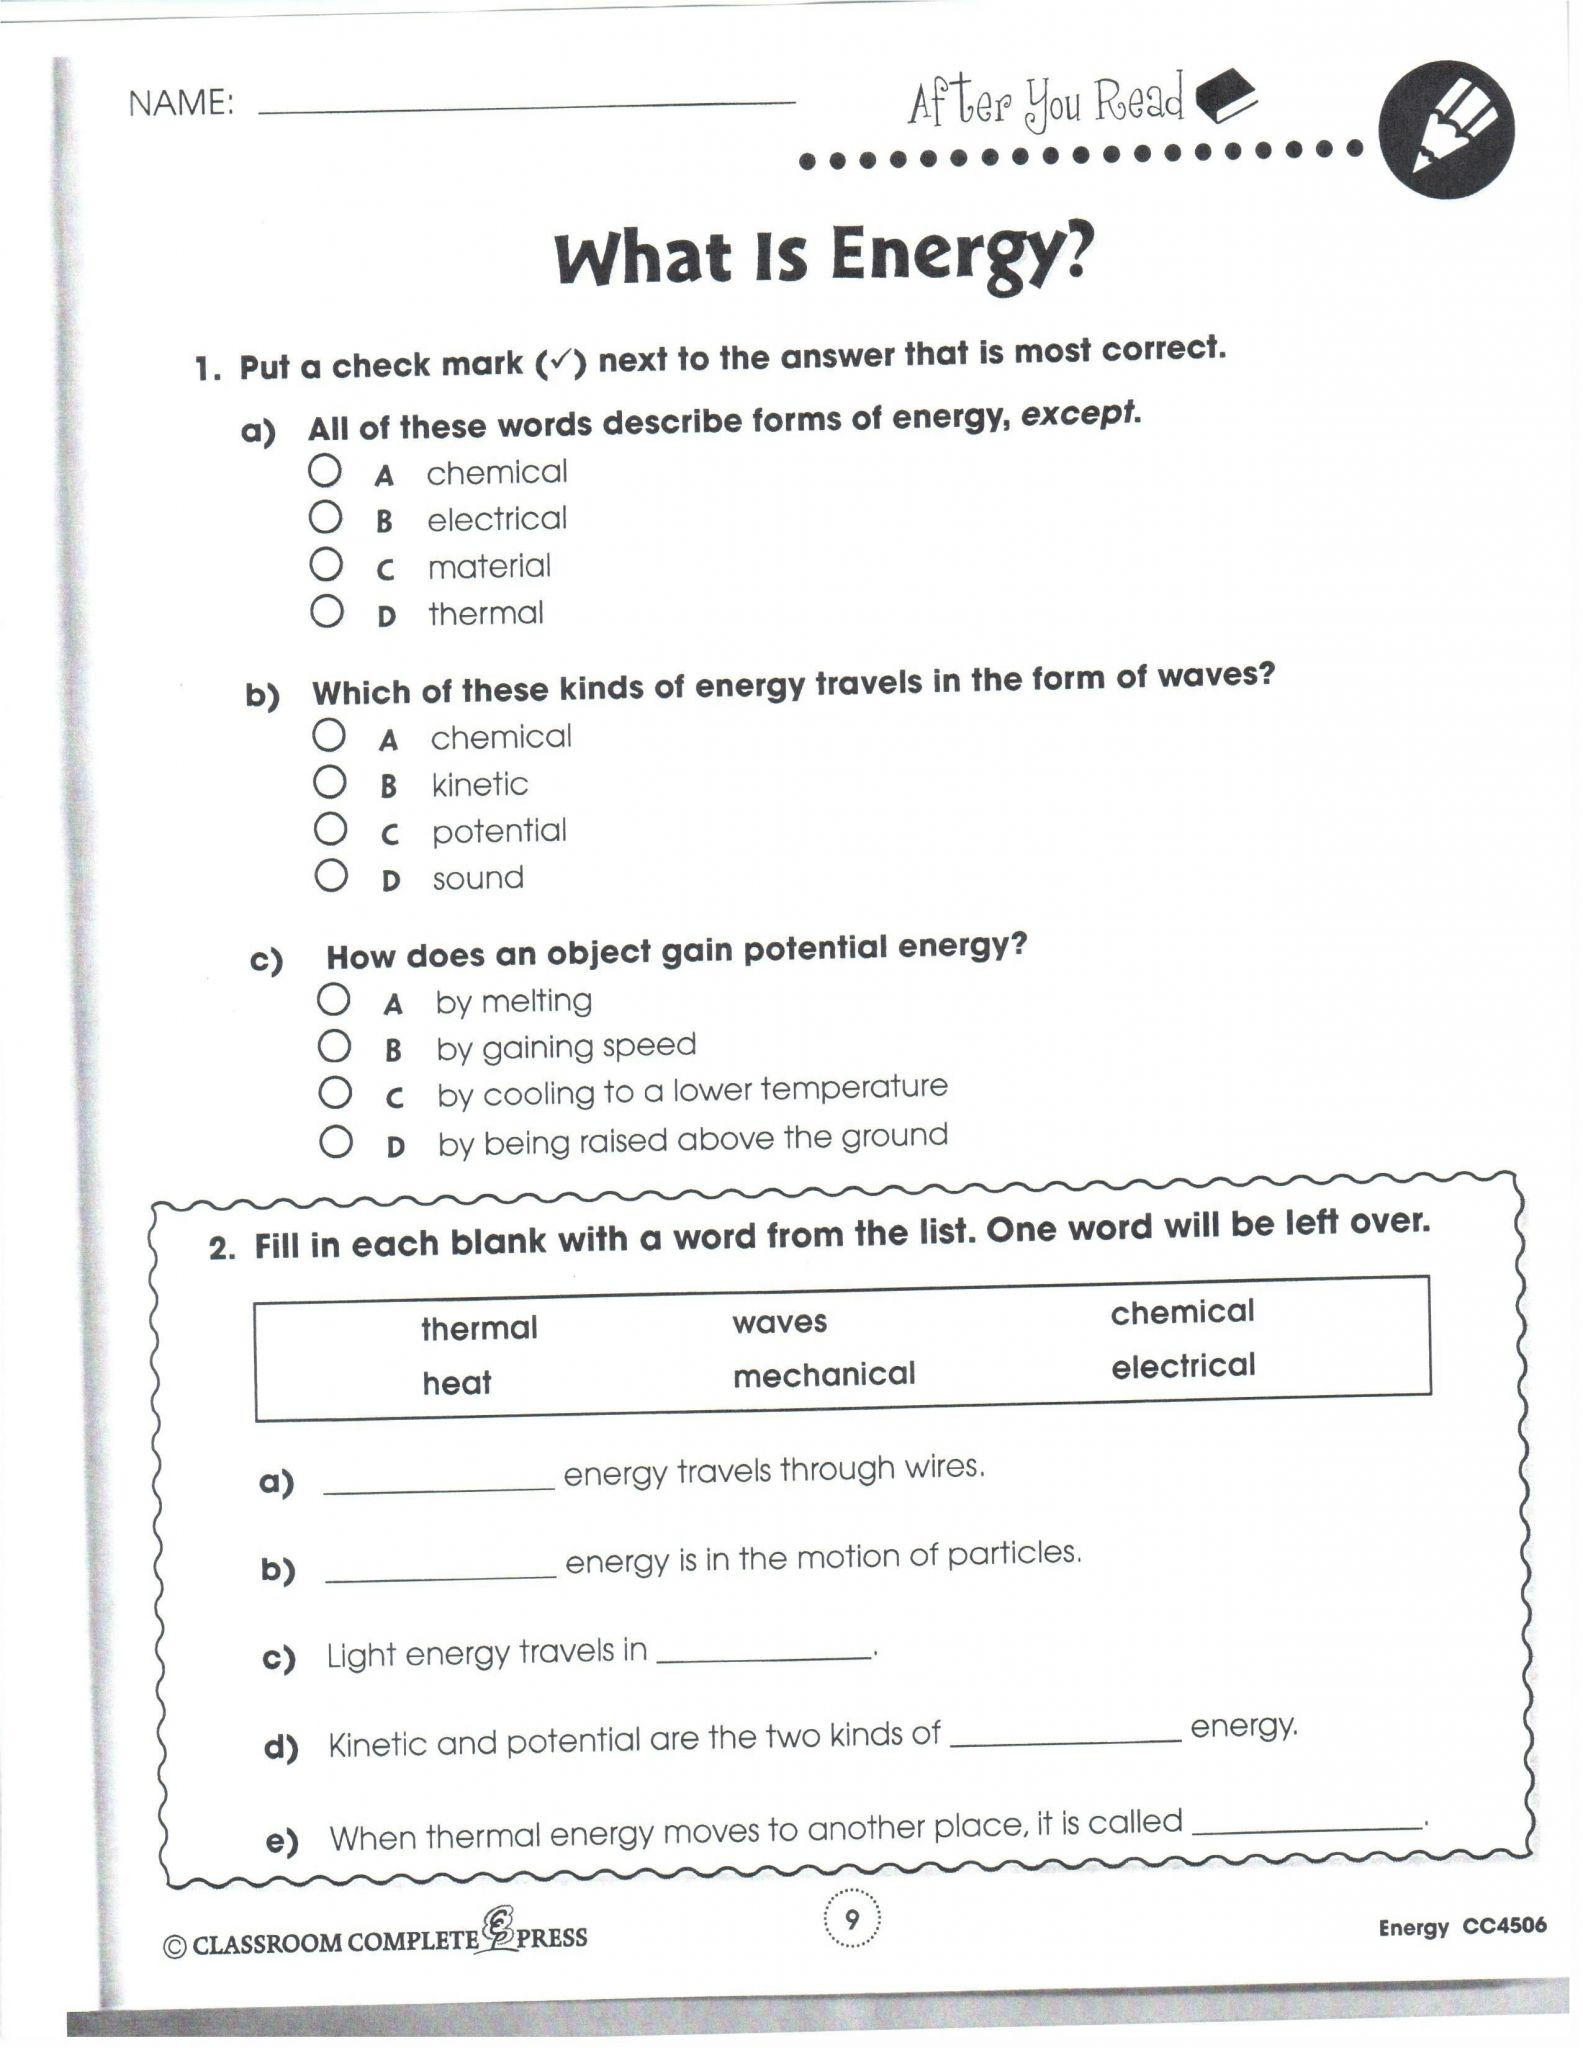 Periodic Table Webquest Worksheet Answers 30 Periodic Table Webquest Worksheet Answers Free